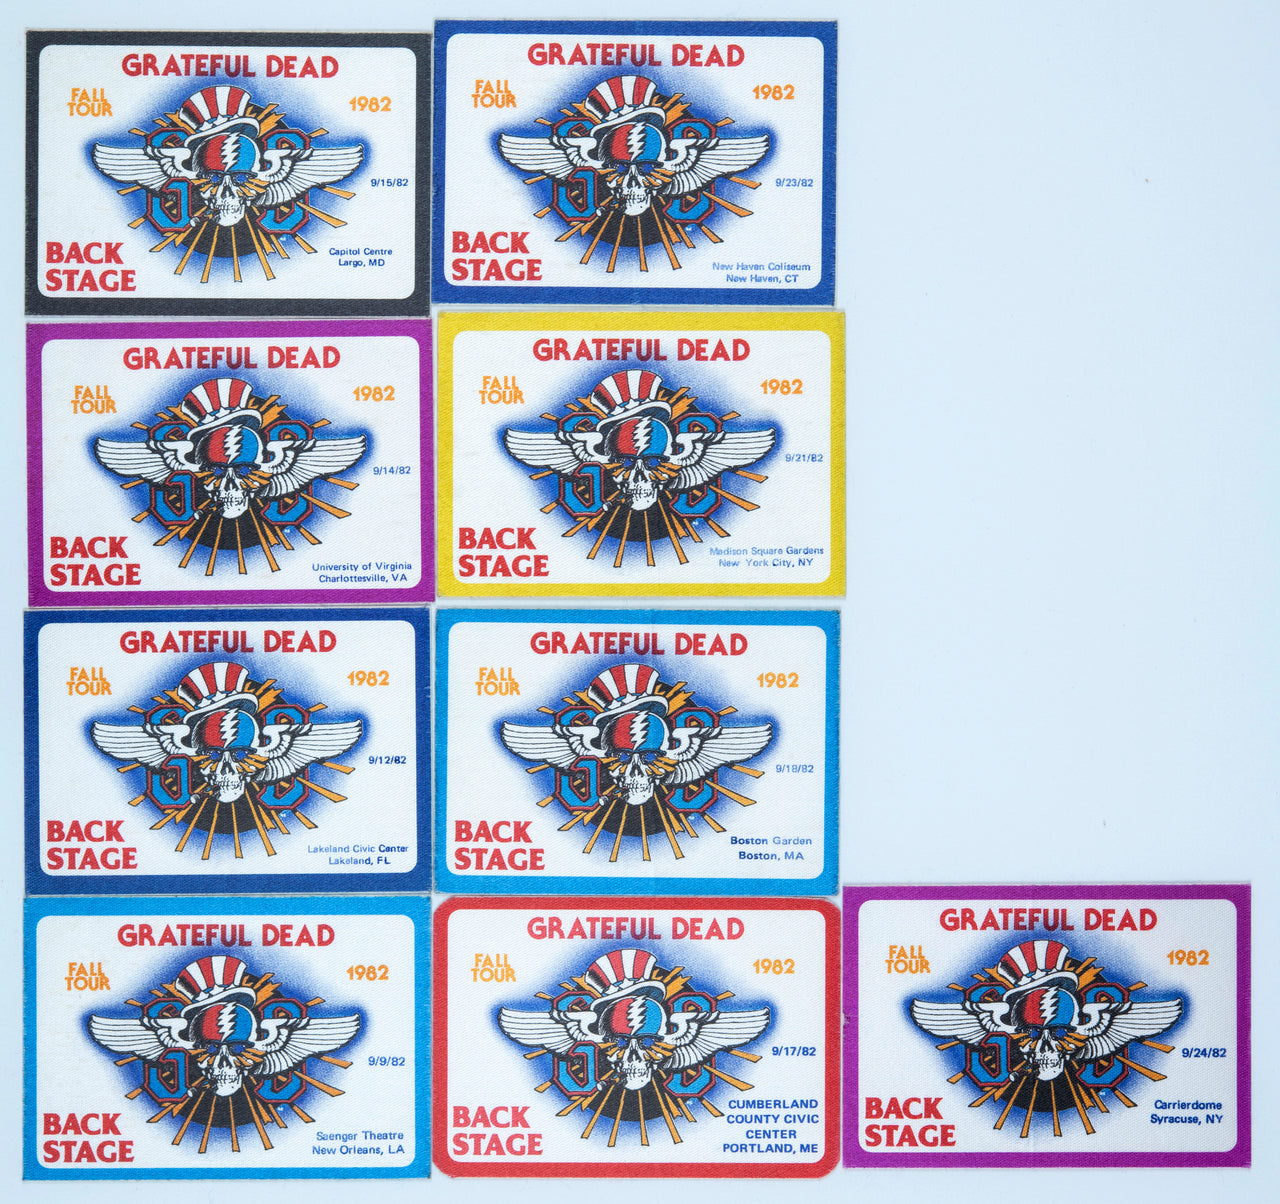 Grateful Dead Backstage Passes (9/9/1982 - 9/24/1982) from Dan Healy (1)